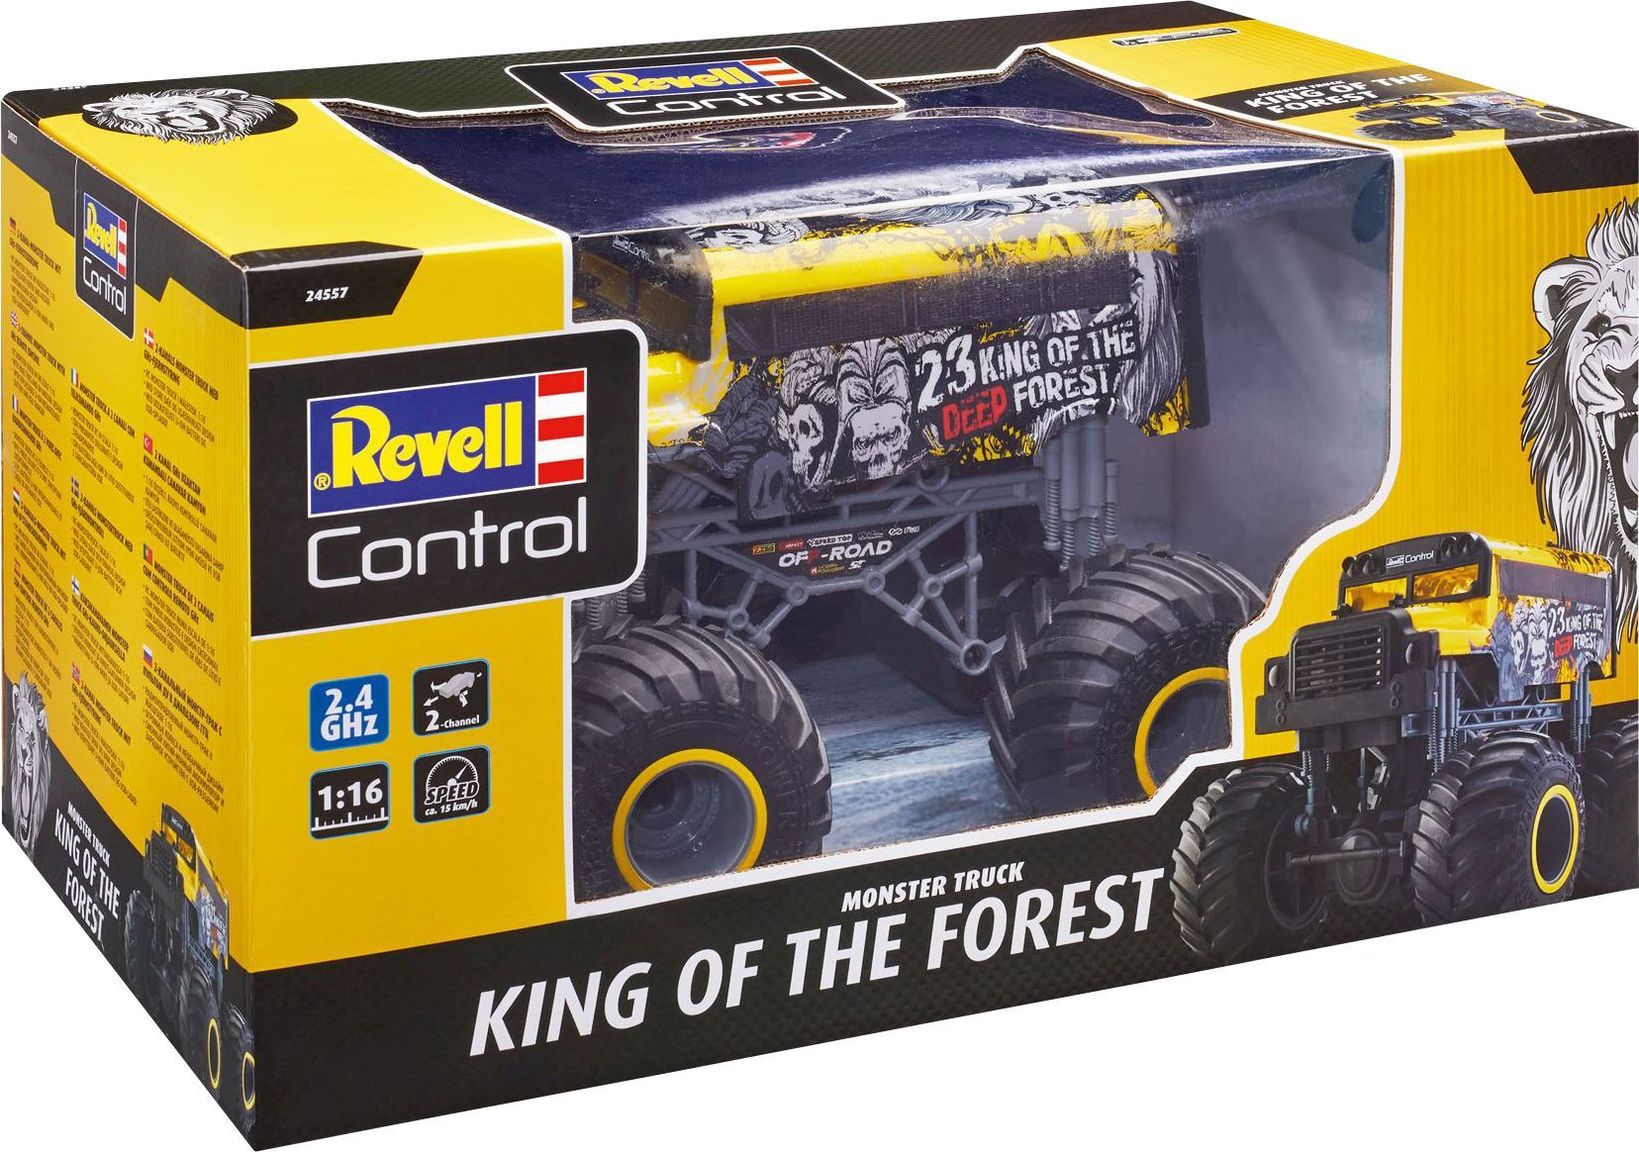 Revell Monster Truck KING OF THE FOREST kaufen | tausendkind.at